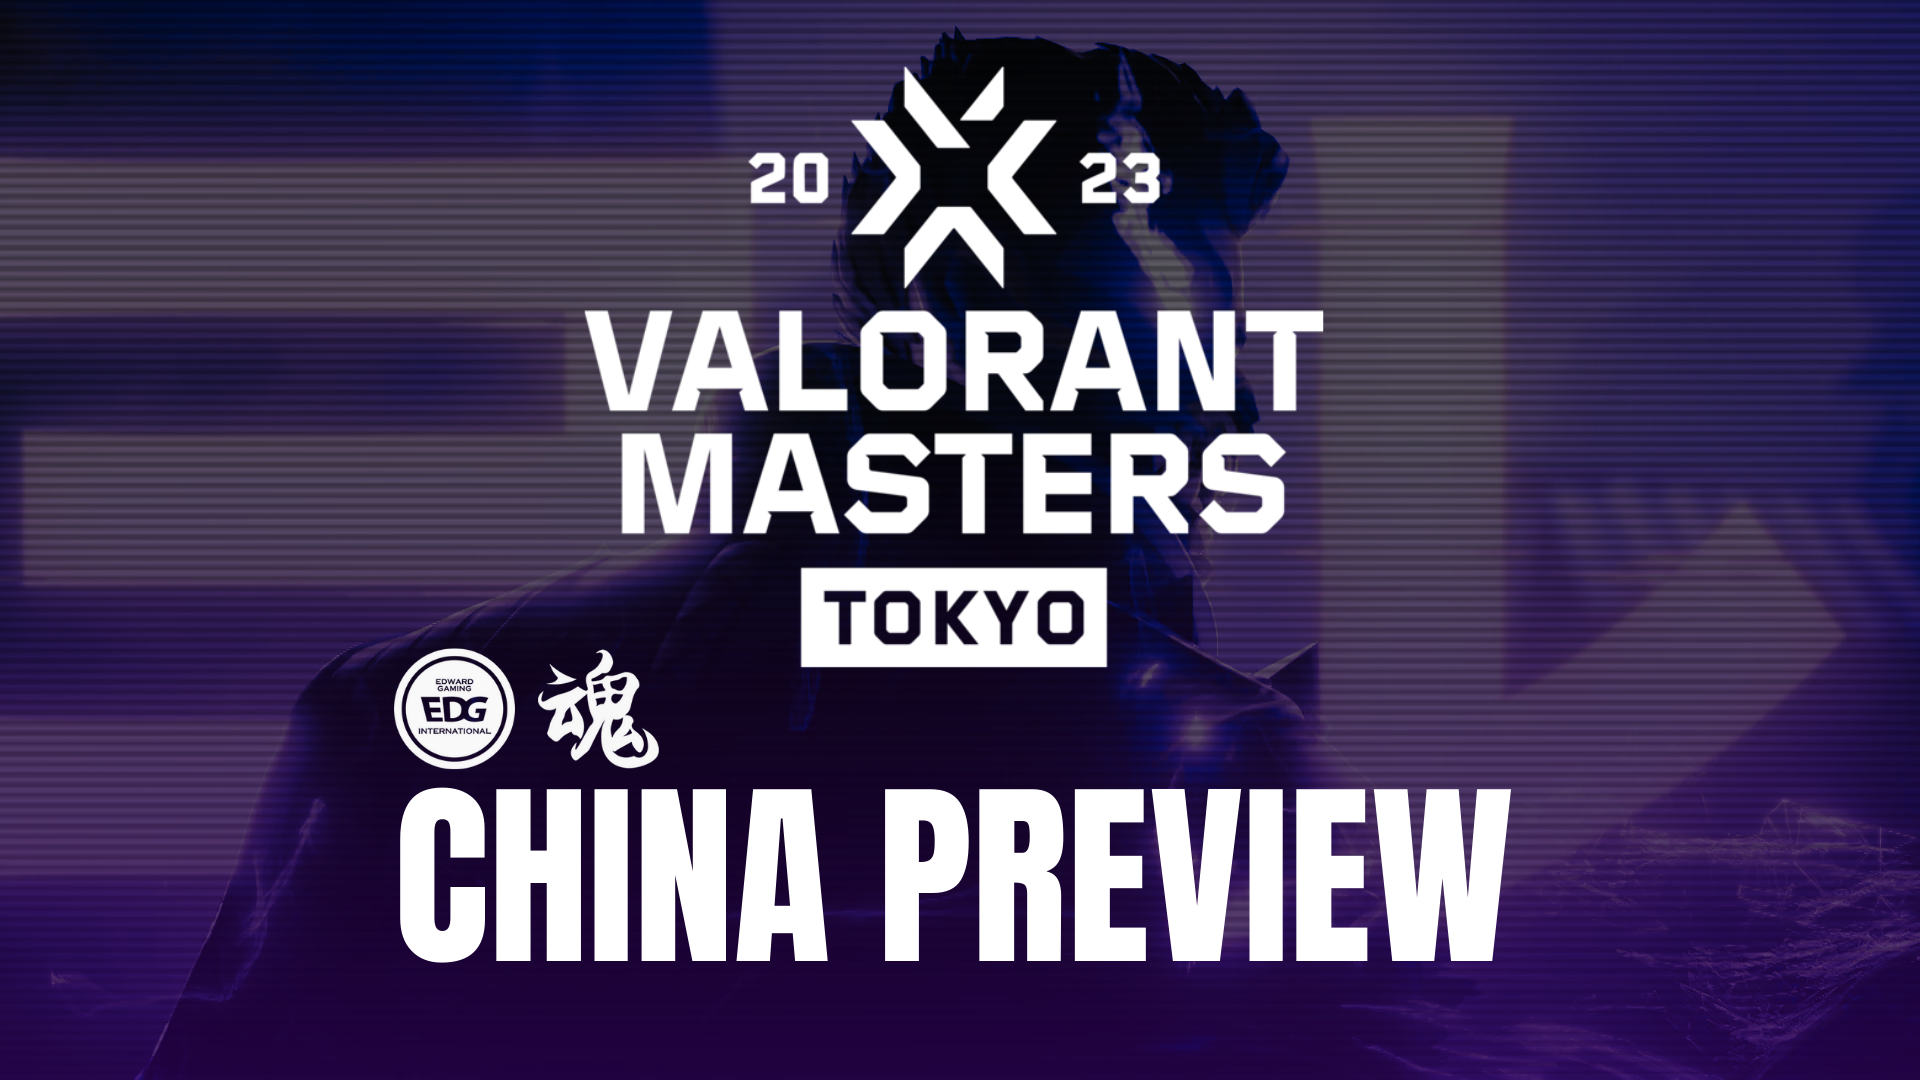 VCT Masters Tokyo China Preview Valorant Tracker